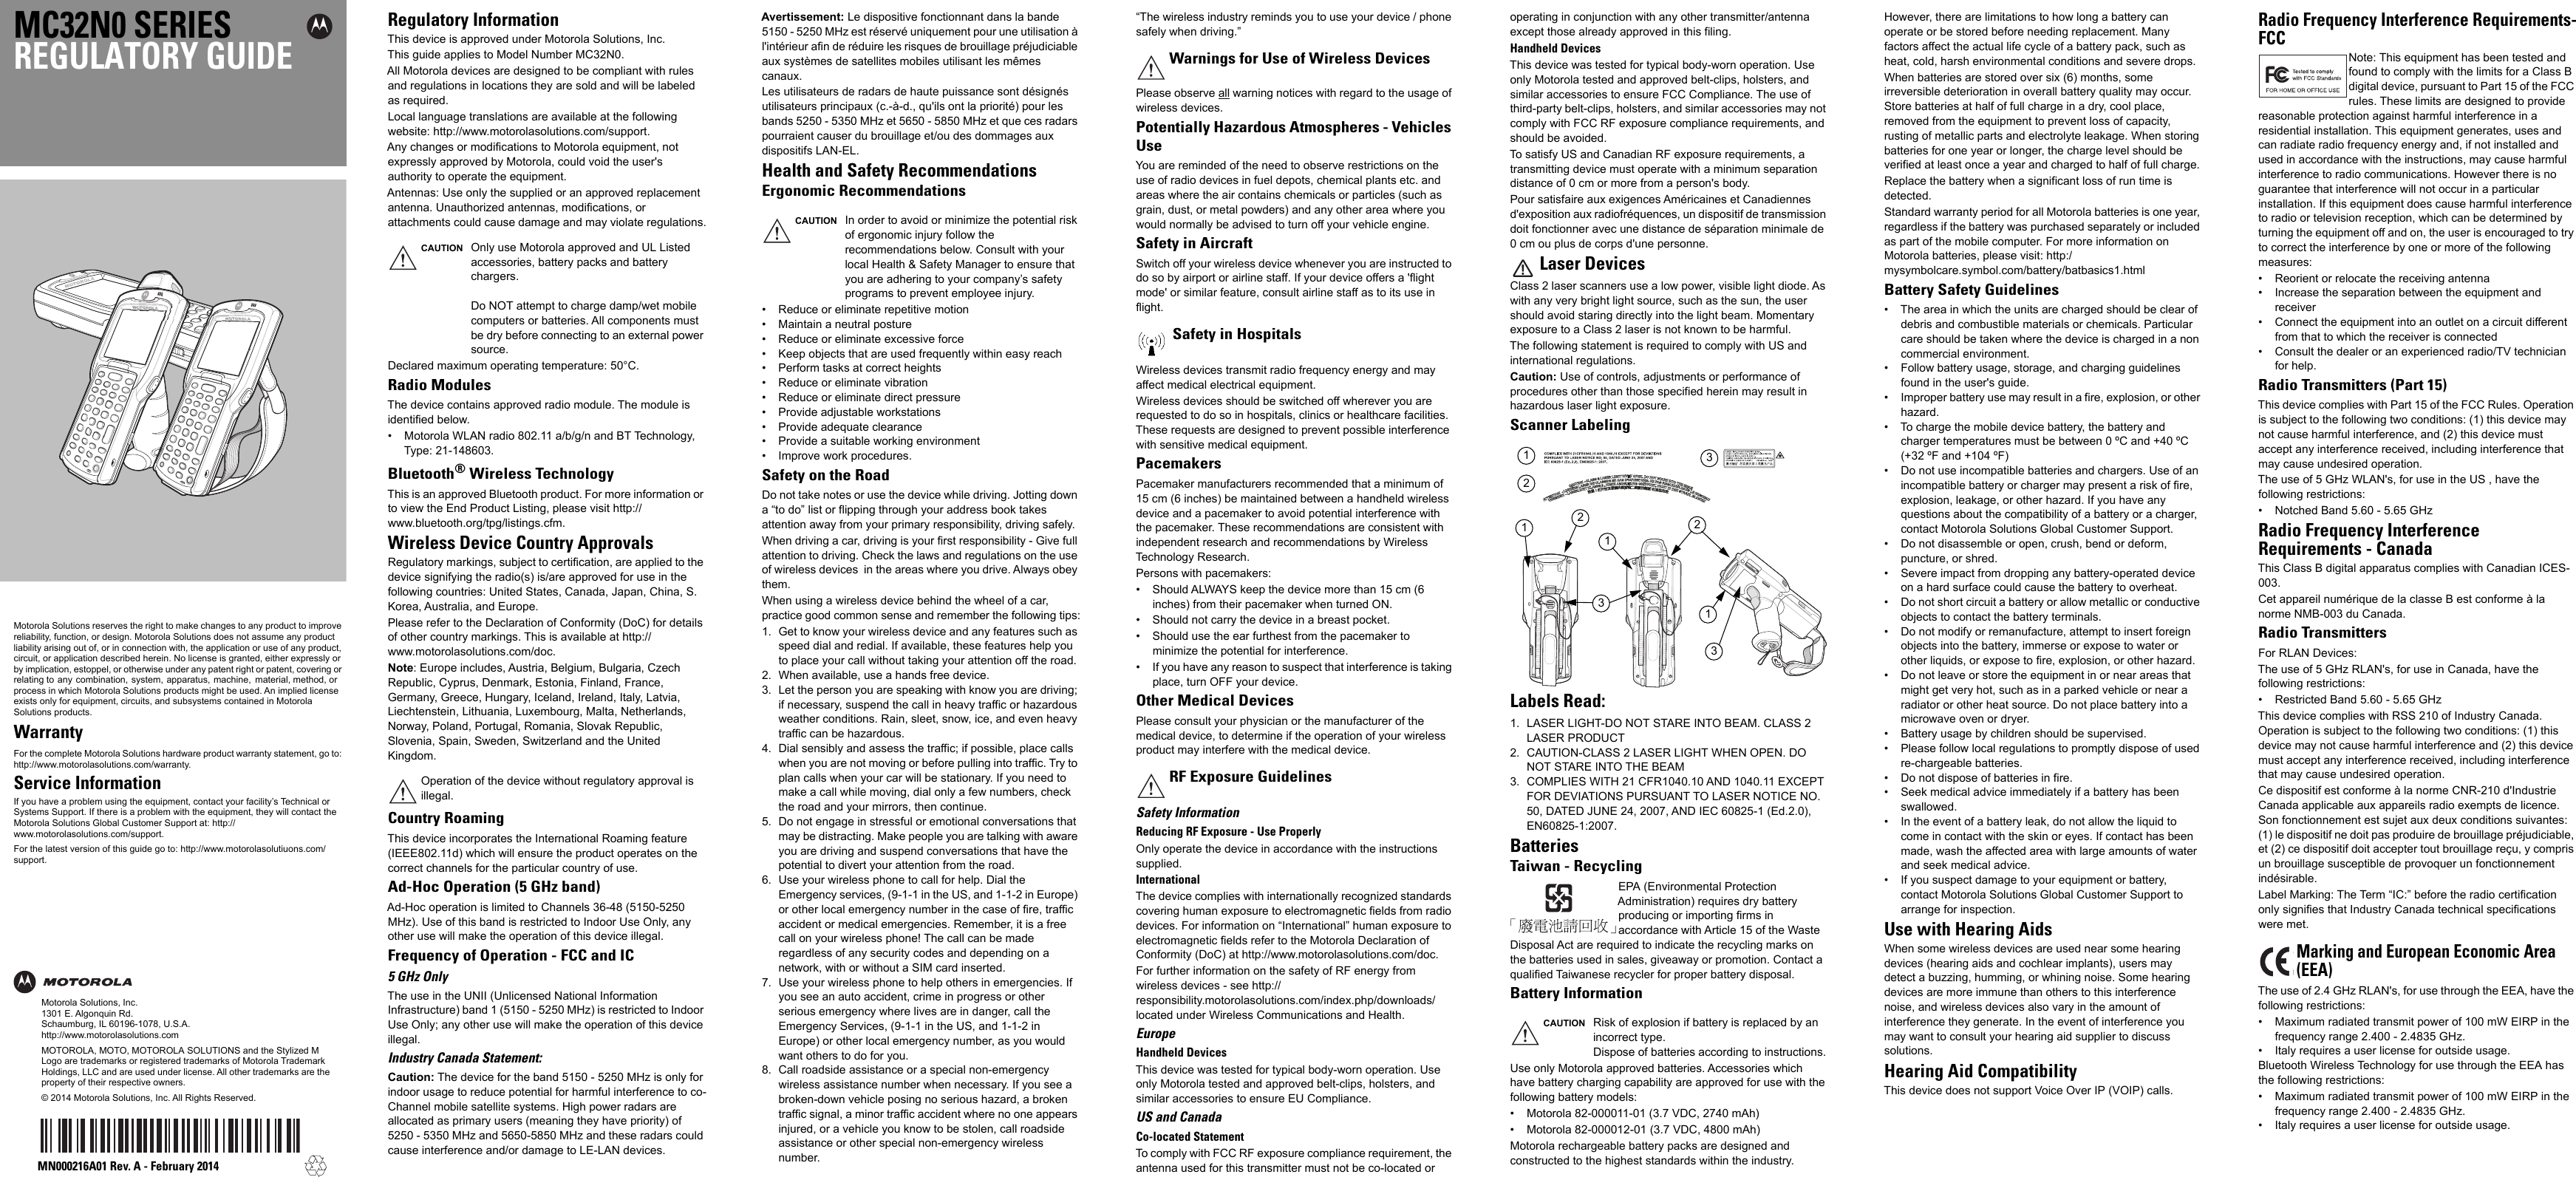 MC32N0 SERIESREGULATORY GUIDEMotorola Solutions reserves the right to make changes to any product to improve reliability, function, or design. Motorola Solutions does not assume any product liability arising out of, or in connection with, the application or use of any product, circuit, or application described herein. No license is granted, either expressly or by implication, estoppel, or otherwise under any patent right or patent, covering or relating to  any  combination,  system,  apparatus,  machine,   material, method, or process in which Motorola Solutions products might be used. An implied license exists only for equipment, circuits, and subsystems contained in Motorola Solutions products.WarrantyFor the complete Motorola Solutions hardware product warranty statement, go to: http://www.motorolasolutions.com/warranty.Service InformationIf you have a problem using the equipment, contact your facility’s Technical or Systems Support. If there is a problem with the equipment, they will contact the Motorola Solutions Global Customer Support at: http://www.motorolasolutions.com/support.For the latest version of this guide go to: http://www.motorolasolutiuons.com/support.Motorola Solutions, Inc.1301 E. Algonquin Rd.Schaumburg, IL 60196-1078, U.S.A.http://www.motorolasolutions.comMOTOROLA, MOTO, MOTOROLA SOLUTIONS and the Stylized M Logo are trademarks or registered trademarks of Motorola Trademark Holdings, LLC and are used under license. All other trademarks are the property of their respective owners.© 2014 Motorola Solutions, Inc. All Rights Reserved.MN000216A01 Rev. A - February 2014Regulatory InformationThis device is approved under Motorola Solutions, Inc.This guide applies to Model Number MC32N0.All Motorola devices are designed to be compliant with rules and regulations in locations they are sold and will be labeled as required.Local language translations are available at the following website: http://www.motorolasolutions.com/support.Any changes or modifications to Motorola equipment, not expressly approved by Motorola, could void the user&apos;s authority to operate the equipment.Antennas: Use only the supplied or an approved replacement antenna. Unauthorized antennas, modifications, or attachments could cause damage and may violate regulations.Declared maximum operating temperature: 50°C.Radio ModulesThe device contains approved radio module. The module is identified below.• Motorola WLAN radio 802.11 a/b/g/n and BT Technology, Type: 21-148603.Bluetooth®Wireless TechnologyThis is an approved Bluetooth product. For more information or to view the End Product Listing, please visit http://www.bluetooth.org/tpg/listings.cfm.Wireless Device Country ApprovalsRegulatory markings, subject to certification, are applied to the device signifying the radio(s) is/are approved for use in the following countries: United States, Canada, Japan, China, S. Korea, Australia, and Europe.Please refer to the Declaration of Conformity (DoC) for details of other country markings. This is available at http://www.motorolasolutions.com/doc.Note: Europe includes, Austria, Belgium, Bulgaria, Czech Republic, Cyprus, Denmark, Estonia, Finland, France, Germany, Greece, Hungary, Iceland, Ireland, Italy, Latvia, Liechtenstein, Lithuania, Luxembourg, Malta, Netherlands, Norway, Poland, Portugal, Romania, Slovak Republic, Slovenia, Spain, Sweden, Switzerland and the United Kingdom.Country RoamingThis device incorporates the International Roaming feature (IEEE802.11d) which will ensure the product operates on the correct channels for the particular country of use.Ad-Hoc Operation (5 GHz band)Ad-Hoc operation is limited to Channels 36-48 (5150-5250 MHz). Use of this band is restricted to Indoor Use Only, any other use will make the operation of this device illegal.Frequency of Operation - FCC and IC5 GHz OnlyThe use in the UNII (Unlicensed National Information Infrastructure) band 1 (5150 - 5250 MHz) is restricted to Indoor Use Only; any other use will make the operation of this device illegal.Industry Canada Statement:Caution: The device for the band 5150 - 5250 MHz is only for indoor usage to reduce potential for harmful interference to co-Channel mobile satellite systems. High power radars are allocated as primary users (meaning they have priority) of 5250 - 5350 MHz and 5650-5850 MHz and these radars could cause interference and/or damage to LE-LAN devices.Avertissement: Le dispositive fonctionnant dans la bande 5150 - 5250 MHz est réservé uniquement pour une utilisation à l&apos;intérieur afin de réduire les risques de brouillage préjudiciable aux systèmes de satellites mobiles utilisant les mêmes canaux.Les utilisateurs de radars de haute puissance sont désignés utilisateurs principaux (c.-à-d., qu&apos;ils ont la priorité) pour les bands 5250 - 5350 MHz et 5650 - 5850 MHz et que ces radars pourraient causer du brouillage et/ou des dommages aux dispositifs LAN-EL.Health and Safety RecommendationsErgonomic Recommendations• Reduce or eliminate repetitive motion• Maintain a neutral posture• Reduce or eliminate excessive force• Keep objects that are used frequently within easy reach• Perform tasks at correct heights• Reduce or eliminate vibration• Reduce or eliminate direct pressure• Provide adjustable workstations• Provide adequate clearance• Provide a suitable working environment• Improve work procedures.Safety on the RoadDo not take notes or use the device while driving. Jotting down a “to do” list or flipping through your address book takes attention away from your primary responsibility, driving safely.When driving a car, driving is your first responsibility - Give full attention to driving. Check the laws and regulations on the use of wireless devices  in the areas where you drive. Always obey them. When using a wireless device behind the wheel of a car, practice good common sense and remember the following tips:1. Get to know your wireless device and any features such as speed dial and redial. If available, these features help you to place your call without taking your attention off the road.2. When available, use a hands free device. 3. Let the person you are speaking with know you are driving; if necessary, suspend the call in heavy traffic or hazardous weather conditions. Rain, sleet, snow, ice, and even heavy traffic can be hazardous.4. Dial sensibly and assess the traffic; if possible, place calls when you are not moving or before pulling into traffic. Try to plan calls when your car will be stationary. If you need to make a call while moving, dial only a few numbers, check the road and your mirrors, then continue. 5. Do not engage in stressful or emotional conversations that may be distracting. Make people you are talking with aware you are driving and suspend conversations that have the potential to divert your attention from the road.6. Use your wireless phone to call for help. Dial the Emergency services, (9-1-1 in the US, and 1-1-2 in Europe) or other local emergency number in the case of fire, traffic accident or medical emergencies. Remember, it is a free call on your wireless phone! The call can be made regardless of any security codes and depending on a network, with or without a SIM card inserted.7. Use your wireless phone to help others in emergencies. If you see an auto accident, crime in progress or other serious emergency where lives are in danger, call the Emergency Services, (9-1-1 in the US, and 1-1-2 in Europe) or other local emergency number, as you would want others to do for you.8. Call roadside assistance or a special non-emergency wireless assistance number when necessary. If you see a broken-down vehicle posing no serious hazard, a broken traffic signal, a minor traffic accident where no one appears injured, or a vehicle you know to be stolen, call roadside assistance or other special non-emergency wireless number.“The wireless industry reminds you to use your device / phone safely when driving.”Please observe all warning notices with regard to the usage of wireless devices.Potentially Hazardous Atmospheres - VehiclesUseYou are reminded of the need to observe restrictions on the use of radio devices in fuel depots, chemical plants etc. and areas where the air contains chemicals or particles (such as grain, dust, or metal powders) and any other area where you would normally be advised to turn off your vehicle engine.Safety in AircraftSwitch off your wireless device whenever you are instructed to do so by airport or airline staff. If your device offers a &apos;flight mode&apos; or similar feature, consult airline staff as to its use in flight.Wireless devices transmit radio frequency energy and may affect medical electrical equipment.Wireless devices should be switched off wherever you are requested to do so in hospitals, clinics or healthcare facilities. These requests are designed to prevent possible interference with sensitive medical equipment.PacemakersPacemaker manufacturers recommended that a minimum of 15 cm (6 inches) be maintained between a handheld wireless device and a pacemaker to avoid potential interference with the pacemaker. These recommendations are consistent with independent research and recommendations by Wireless Technology Research.Persons with pacemakers:• Should ALWAYS keep the device more than 15 cm (6 inches) from their pacemaker when turned ON.• Should not carry the device in a breast pocket.• Should use the ear furthest from the pacemaker to minimize the potential for interference.• If you have any reason to suspect that interference is taking place, turn OFF your device.Other Medical DevicesPlease consult your physician or the manufacturer of the medical device, to determine if the operation of your wireless product may interfere with the medical device.Safety InformationReducing RF Exposure - Use ProperlyOnly operate the device in accordance with the instructions supplied.InternationalThe device complies with internationally recognized standards covering human exposure to electromagnetic fields from radio devices. For information on “International” human exposure to electromagnetic fields refer to the Motorola Declaration of Conformity (DoC) at http://www.motorolasolutions.com/doc.For further information on the safety of RF energy from wireless devices - see http://responsibility.motorolasolutions.com/index.php/downloads/ located under Wireless Communications and Health.EuropeHandheld DevicesThis device was tested for typical body-worn operation. Use only Motorola tested and approved belt-clips, holsters, and similar accessories to ensure EU Compliance.US and CanadaCo-located StatementTo comply with FCC RF exposure compliance requirement, the antenna used for this transmitter must not be co-located or operating in conjunction with any other transmitter/antenna except those already approved in this filing.Handheld DevicesThis device was tested for typical body-worn operation. Use only Motorola tested and approved belt-clips, holsters, and similar accessories to ensure FCC Compliance. The use of third-party belt-clips, holsters, and similar accessories may not comply with FCC RF exposure compliance requirements, and should be avoided.To satisfy US and Canadian RF exposure requirements, a transmitting device must operate with a minimum separation distance of 0 cm or more from a person&apos;s body. Pour satisfaire aux exigences Américaines et Canadiennes d&apos;exposition aux radiofréquences, un dispositif de transmission doit fonctionner avec une distance de séparation minimale de 0 cm ou plus de corps d&apos;une personne.Laser DevicesClass 2 laser scanners use a low power, visible light diode. As with any very bright light source, such as the sun, the user should avoid staring directly into the light beam. Momentary exposure to a Class 2 laser is not known to be harmful.The following statement is required to comply with US and international regulations.Caution: Use of controls, adjustments or performance of procedures other than those specified herein may result in hazardous laser light exposure.Scanner LabelingLabels Read:1. LASER LIGHT-DO NOT STARE INTO BEAM. CLASS 2 LASER PRODUCT2. CAUTION-CLASS 2 LASER LIGHT WHEN OPEN. DO NOT STARE INTO THE BEAM3. COMPLIES WITH 21 CFR1040.10 AND 1040.11 EXCEPT FOR DEVIATIONS PURSUANT TO LASER NOTICE NO. 50, DATED JUNE 24, 2007, AND IEC 60825-1 (Ed.2.0), EN60825-1:2007.BatteriesTaiwan - RecyclingEPA (Environmental Protection Administration) requires dry battery producing or importing firms in accordance with Article 15 of the Waste Disposal Act are required to indicate the recycling marks on the batteries used in sales, giveaway or promotion. Contact a qualified Taiwanese recycler for proper battery disposal.Battery InformationUse only Motorola approved batteries. Accessories which have battery charging capability are approved for use with the following battery models:• Motorola 82-000011-01 (3.7 VDC, 2740 mAh)• Motorola 82-000012-01 (3.7 VDC, 4800 mAh)Motorola rechargeable battery packs are designed and constructed to the highest standards within the industry.However, there are limitations to how long a battery can operate or be stored before needing replacement. Many factors affect the actual life cycle of a battery pack, such as heat, cold, harsh environmental conditions and severe drops.When batteries are stored over six (6) months, some irreversible deterioration in overall battery quality may occur. Store batteries at half of full charge in a dry, cool place, removed from the equipment to prevent loss of capacity, rusting of metallic parts and electrolyte leakage. When storing batteries for one year or longer, the charge level should be verified at least once a year and charged to half of full charge.Replace the battery when a significant loss of run time is detected.Standard warranty period for all Motorola batteries is one year, regardless if the battery was purchased separately or included as part of the mobile computer. For more information on Motorola batteries, please visit: http:/mysymbolcare.symbol.com/battery/batbasics1.htmlBattery Safety Guidelines• The area in which the units are charged should be clear of debris and combustible materials or chemicals. Particular care should be taken where the device is charged in a non commercial environment.• Follow battery usage, storage, and charging guidelines found in the user&apos;s guide.• Improper battery use may result in a fire, explosion, or other hazard.• To charge the mobile device battery, the battery and charger temperatures must be between 0 ºC and +40 ºC (+32 ºF and +104 ºF)• Do not use incompatible batteries and chargers. Use of an incompatible battery or charger may present a risk of fire, explosion, leakage, or other hazard. If you have any questions about the compatibility of a battery or a charger, contact Motorola Solutions Global Customer Support.• Do not disassemble or open, crush, bend or deform, puncture, or shred.• Severe impact from dropping any battery-operated device on a hard surface could cause the battery to overheat.• Do not short circuit a battery or allow metallic or conductive objects to contact the battery terminals.• Do not modify or remanufacture, attempt to insert foreign objects into the battery, immerse or expose to water or other liquids, or expose to fire, explosion, or other hazard.• Do not leave or store the equipment in or near areas that might get very hot, such as in a parked vehicle or near a radiator or other heat source. Do not place battery into a microwave oven or dryer.• Battery usage by children should be supervised.• Please follow local regulations to promptly dispose of used re-chargeable batteries.• Do not dispose of batteries in fire.• Seek medical advice immediately if a battery has been swallowed.• In the event of a battery leak, do not allow the liquid to come in contact with the skin or eyes. If contact has been made, wash the affected area with large amounts of water and seek medical advice.• If you suspect damage to your equipment or battery, contact Motorola Solutions Global Customer Support to arrange for inspection.Use with Hearing AidsWhen some wireless devices are used near some hearing devices (hearing aids and cochlear implants), users may detect a buzzing, humming, or whining noise. Some hearing devices are more immune than others to this interference noise, and wireless devices also vary in the amount of interference they generate. In the event of interference you may want to consult your hearing aid supplier to discuss solutions.Hearing Aid CompatibilityThis device does not support Voice Over IP (VOIP) calls.Radio Frequency Interference Requirements-FCCNote: This equipment has been tested and found to comply with the limits for a Class B digital device, pursuant to Part 15 of the FCC rules. These limits are designed to provide reasonable protection against harmful interference in a residential installation. This equipment generates, uses and can radiate radio frequency energy and, if not installed and used in accordance with the instructions, may cause harmful interference to radio communications. However there is no guarantee that interference will not occur in a particular installation. If this equipment does cause harmful interference to radio or television reception, which can be determined by turning the equipment off and on, the user is encouraged to try to correct the interference by one or more of the following measures:• Reorient or relocate the receiving antenna• Increase the separation between the equipment and receiver• Connect the equipment into an outlet on a circuit different from that to which the receiver is connected• Consult the dealer or an experienced radio/TV technician for help.Radio Transmitters (Part 15)This device complies with Part 15 of the FCC Rules. Operation is subject to the following two conditions: (1) this device may not cause harmful interference, and (2) this device must accept any interference received, including interference that may cause undesired operation.The use of 5 GHz WLAN&apos;s, for use in the US , have the following restrictions:• Notched Band 5.60 - 5.65 GHzRadio Frequency InterferenceRequirements - CanadaThis Class B digital apparatus complies with Canadian ICES-003.Cet appareil numérique de la classe B est conforme à la norme NMB-003 du Canada.Radio TransmittersFor RLAN Devices:The use of 5 GHz RLAN&apos;s, for use in Canada, have the following restrictions:• Restricted Band 5.60 - 5.65 GHzThis device complies with RSS 210 of Industry Canada. Operation is subject to the following two conditions: (1) this device may not cause harmful interference and (2) this device must accept any interference received, including interference that may cause undesired operation.Ce dispositif est conforme à la norme CNR-210 d&apos;Industrie Canada applicable aux appareils radio exempts de licence. Son fonctionnement est sujet aux deux conditions suivantes: (1) le dispositif ne doit pas produire de brouillage préjudiciable, et (2) ce dispositif doit accepter tout brouillage reçu, y compris un brouillage susceptible de provoquer un fonctionnement indésirable.Label Marking: The Term “IC:” before the radio certification only signifies that Industry Canada technical specifications were met.The use of 2.4 GHz RLAN&apos;s, for use through the EEA, have the following restrictions:• Maximum radiated transmit power of 100 mW EIRP in the frequency range 2.400 - 2.4835 GHz.• Italy requires a user license for outside usage.Bluetooth Wireless Technology for use through the EEA has the following restrictions:• Maximum radiated transmit power of 100 mW EIRP in the frequency range 2.400 - 2.4835 GHz.• Italy requires a user license for outside usage.CAUTION Only use Motorola approved and UL Listed accessories, battery packs and battery chargers.Do NOT attempt to charge damp/wet mobile computers or batteries. All components must be dry before connecting to an external power source.Operation of the device without regulatory approval is illegal.CAUTION In order to avoid or minimize the potential risk of ergonomic injury follow the recommendations below. Consult with your local Health &amp; Safety Manager to ensure that you are adhering to your company’s safety programs to prevent employee injury.Warnings for Use of Wireless DevicesSafety in HospitalsRF Exposure GuidelinesCAUTION Risk of explosion if battery is replaced by an incorrect type.Dispose of batteries according to instructions.1231112233Marking and European Economic Area(EEA)